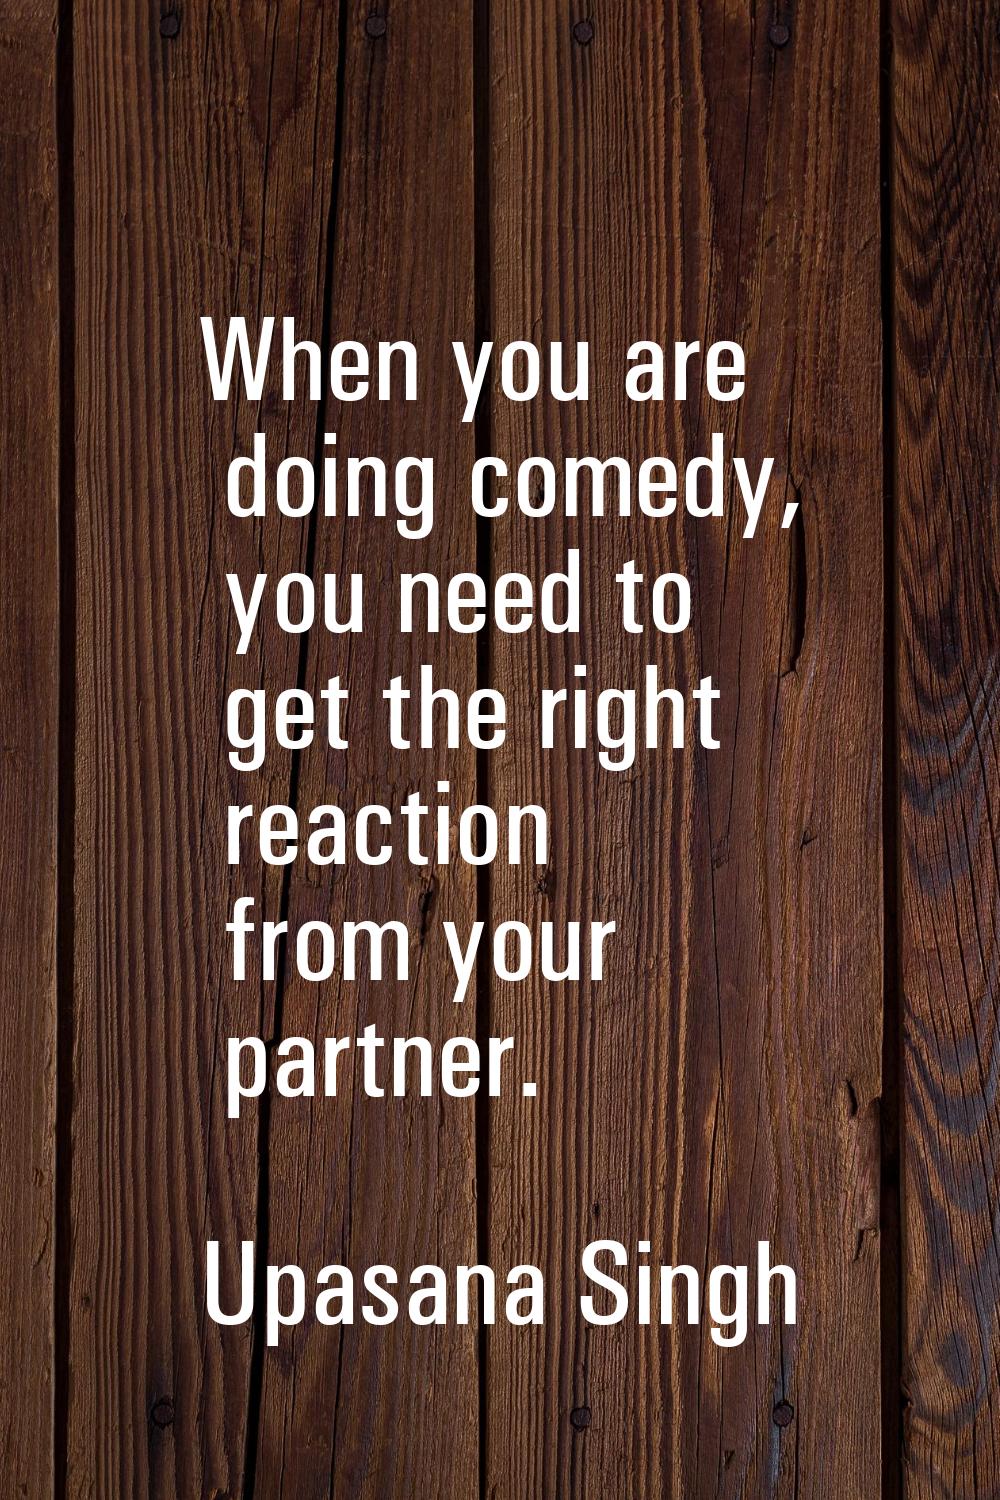 When you are doing comedy, you need to get the right reaction from your partner.